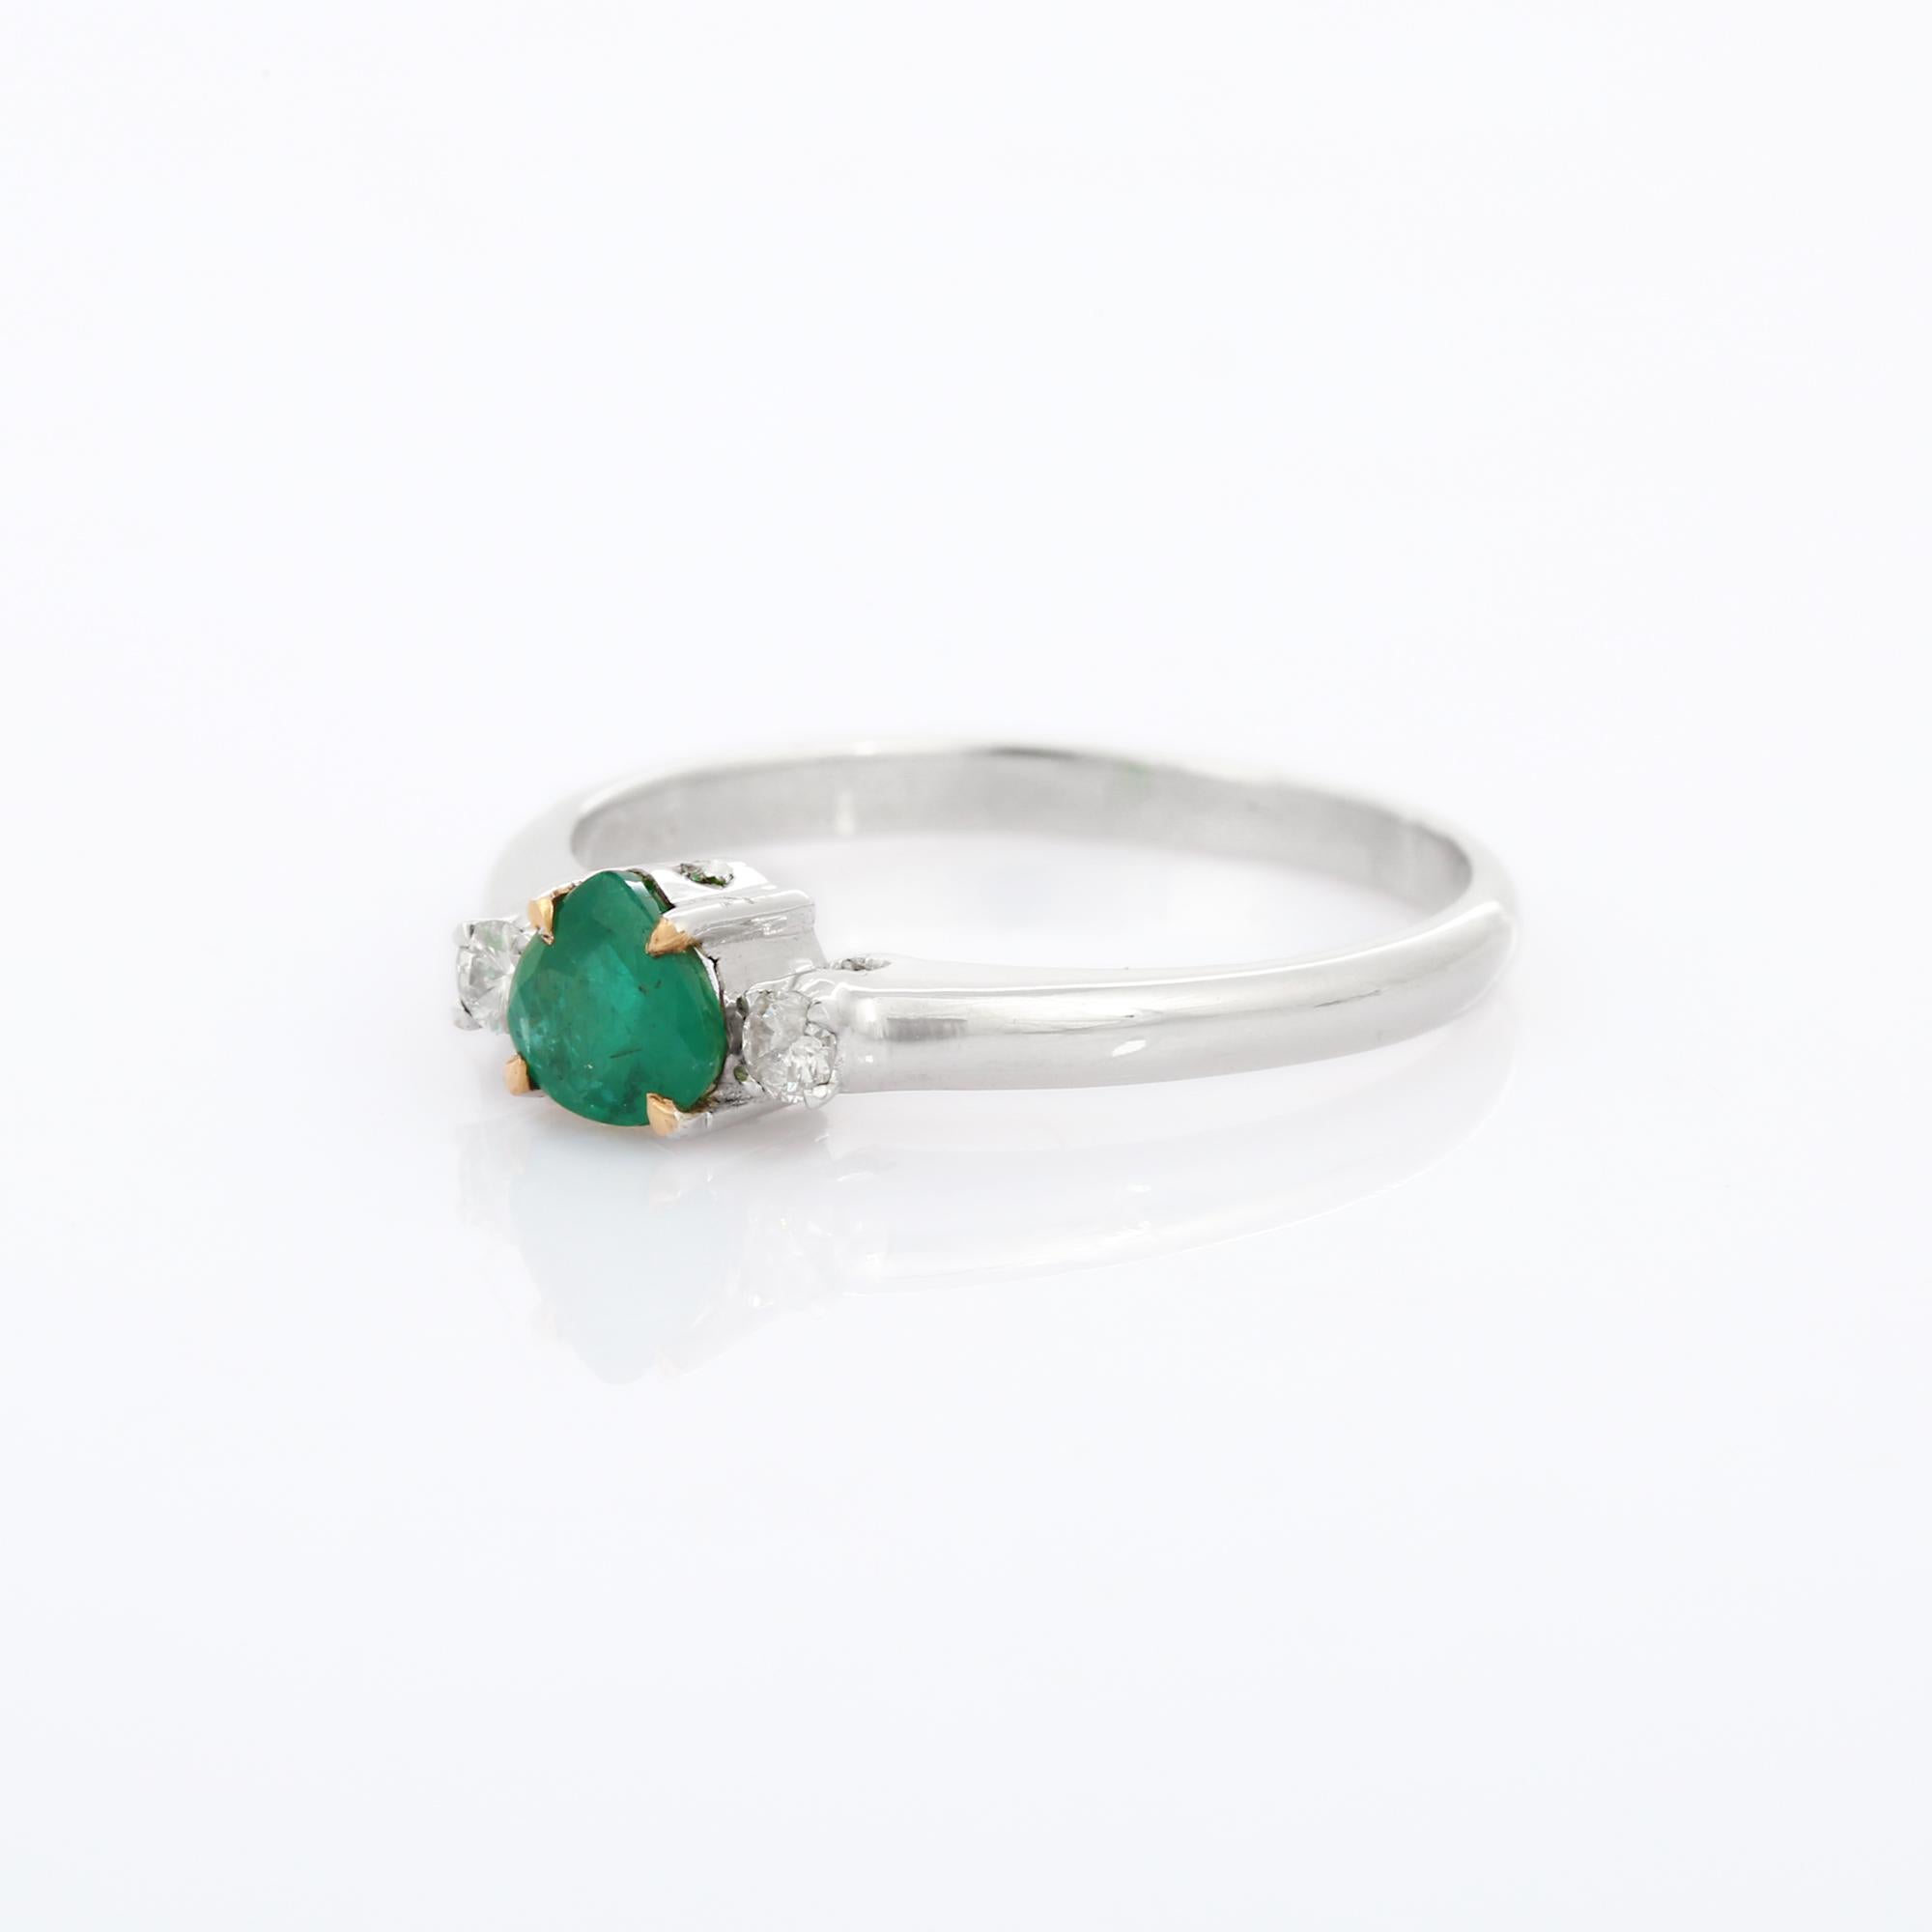 For Sale:  18k Solid White Gold Emerald Ring with Diamonds 3